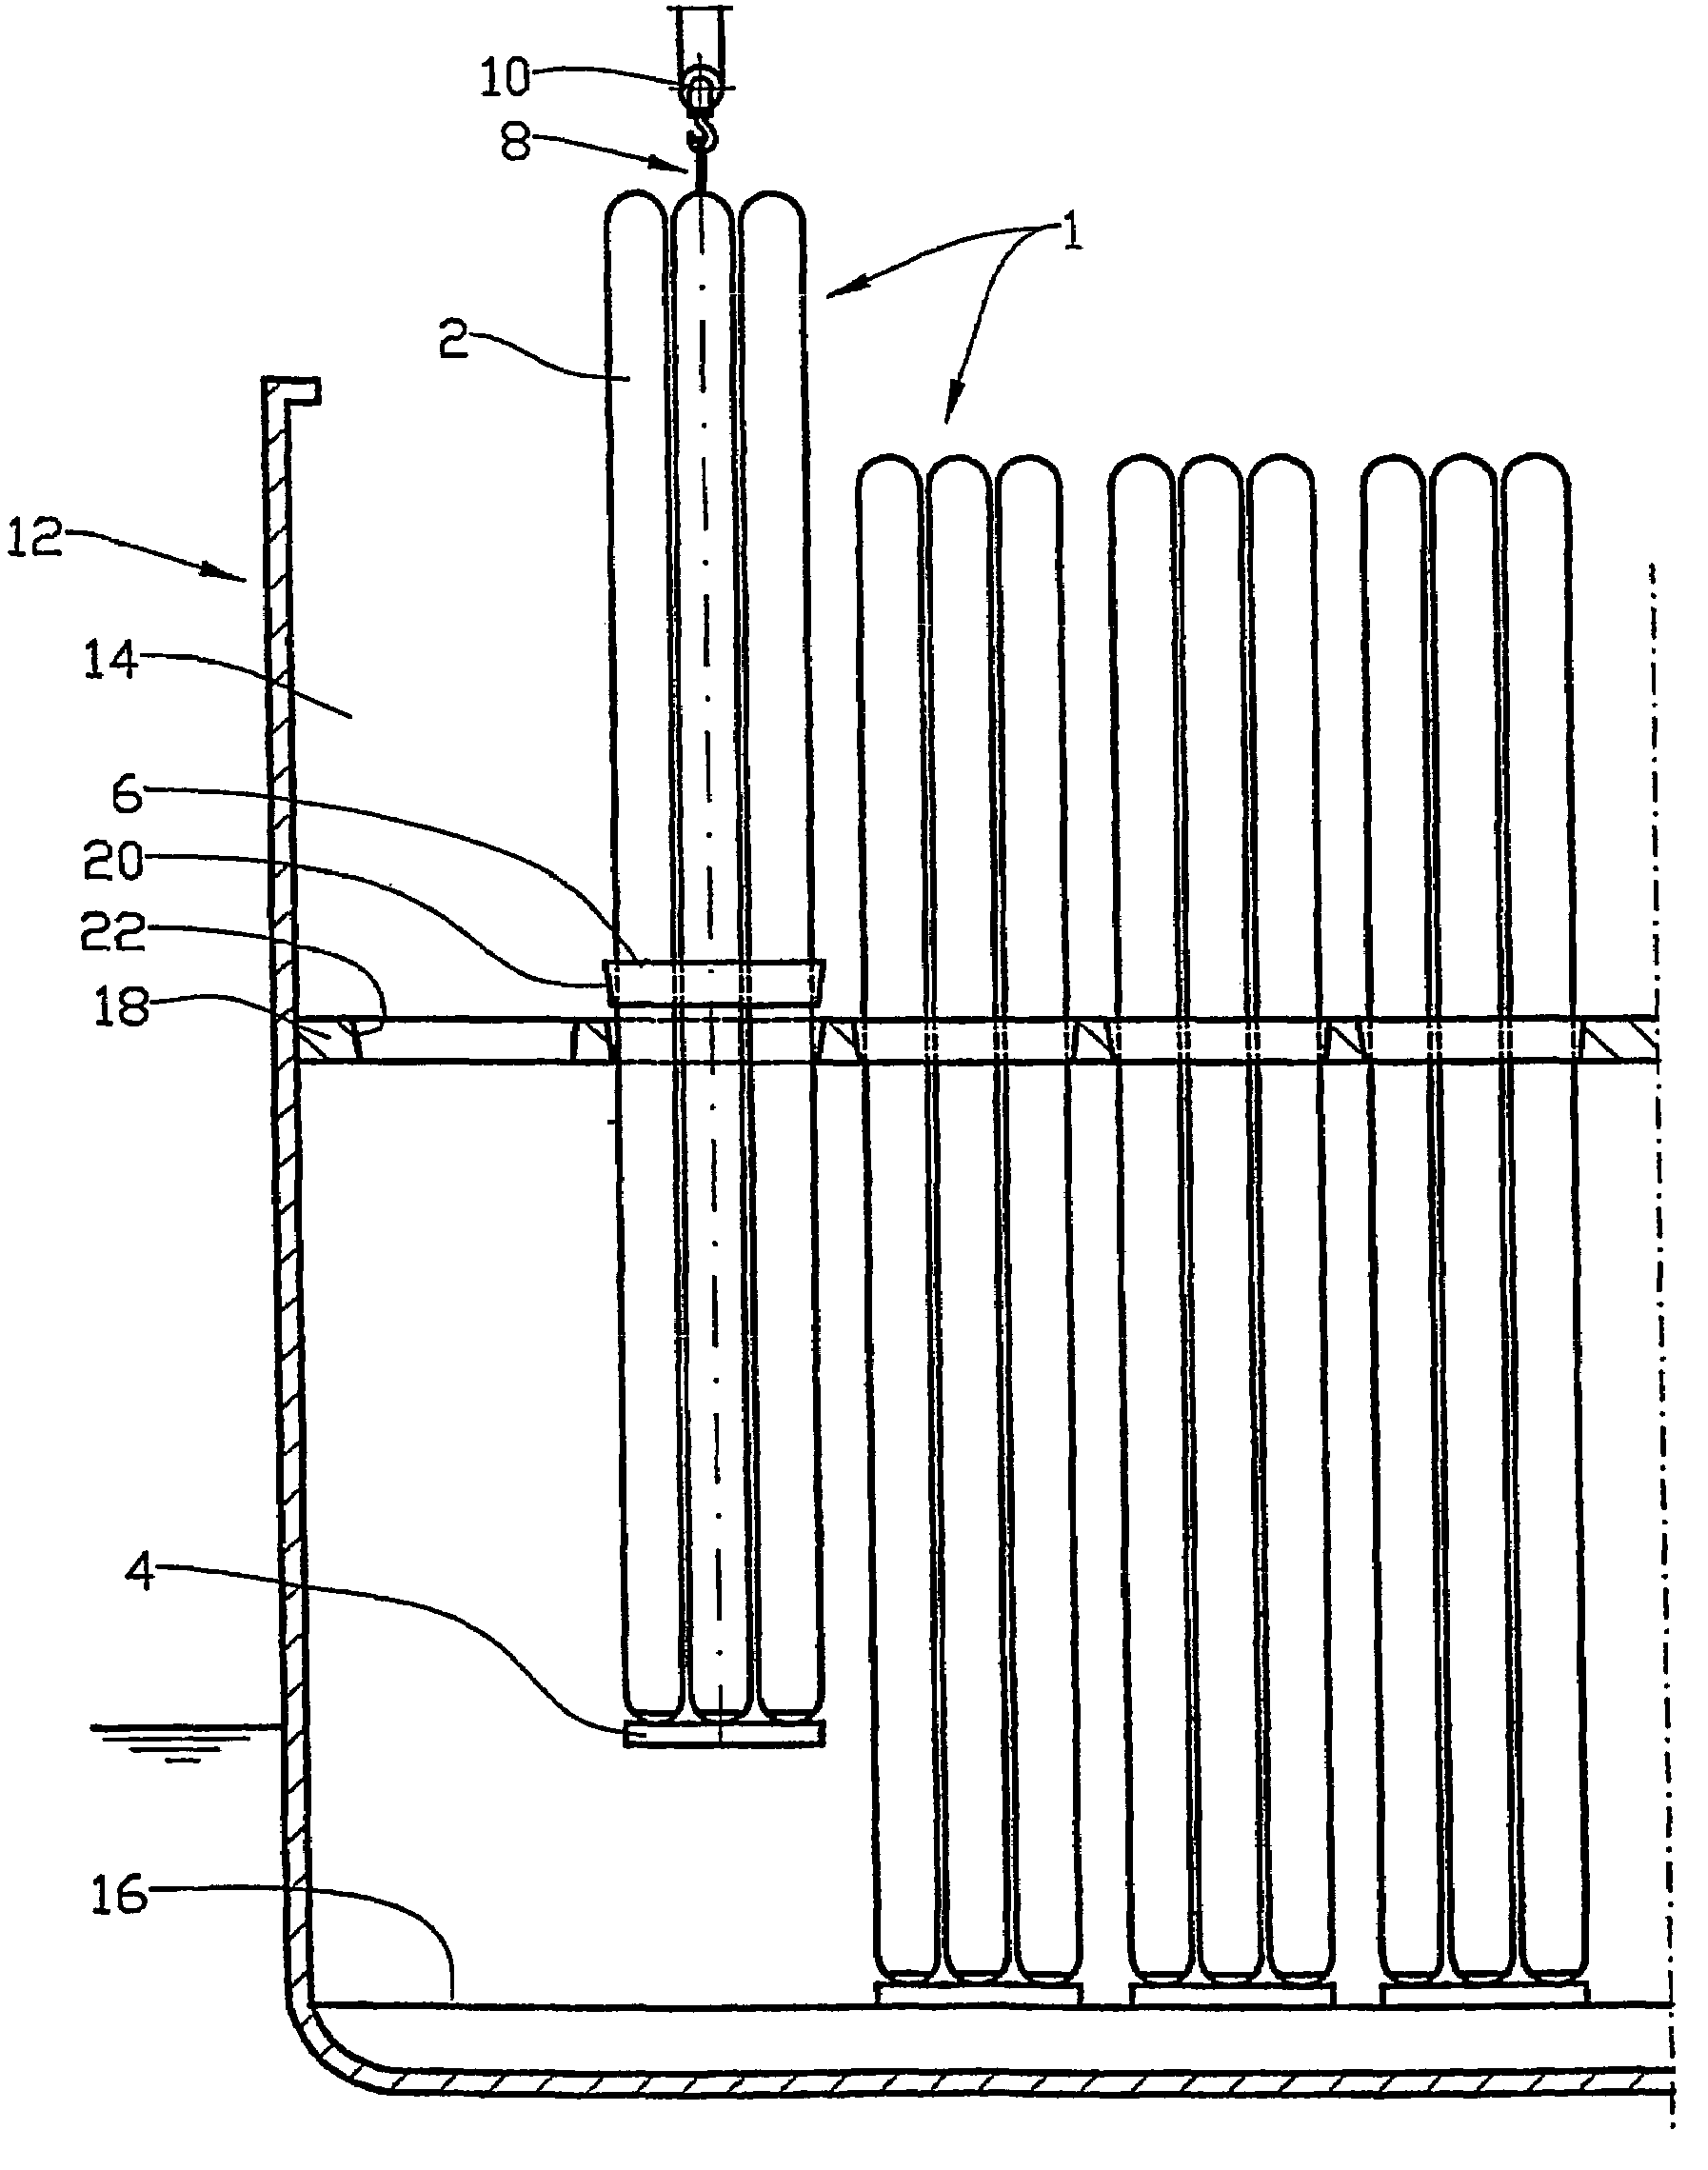 Device for and a method of fixing and lifting vertically installed cargo pressure tanks in ships